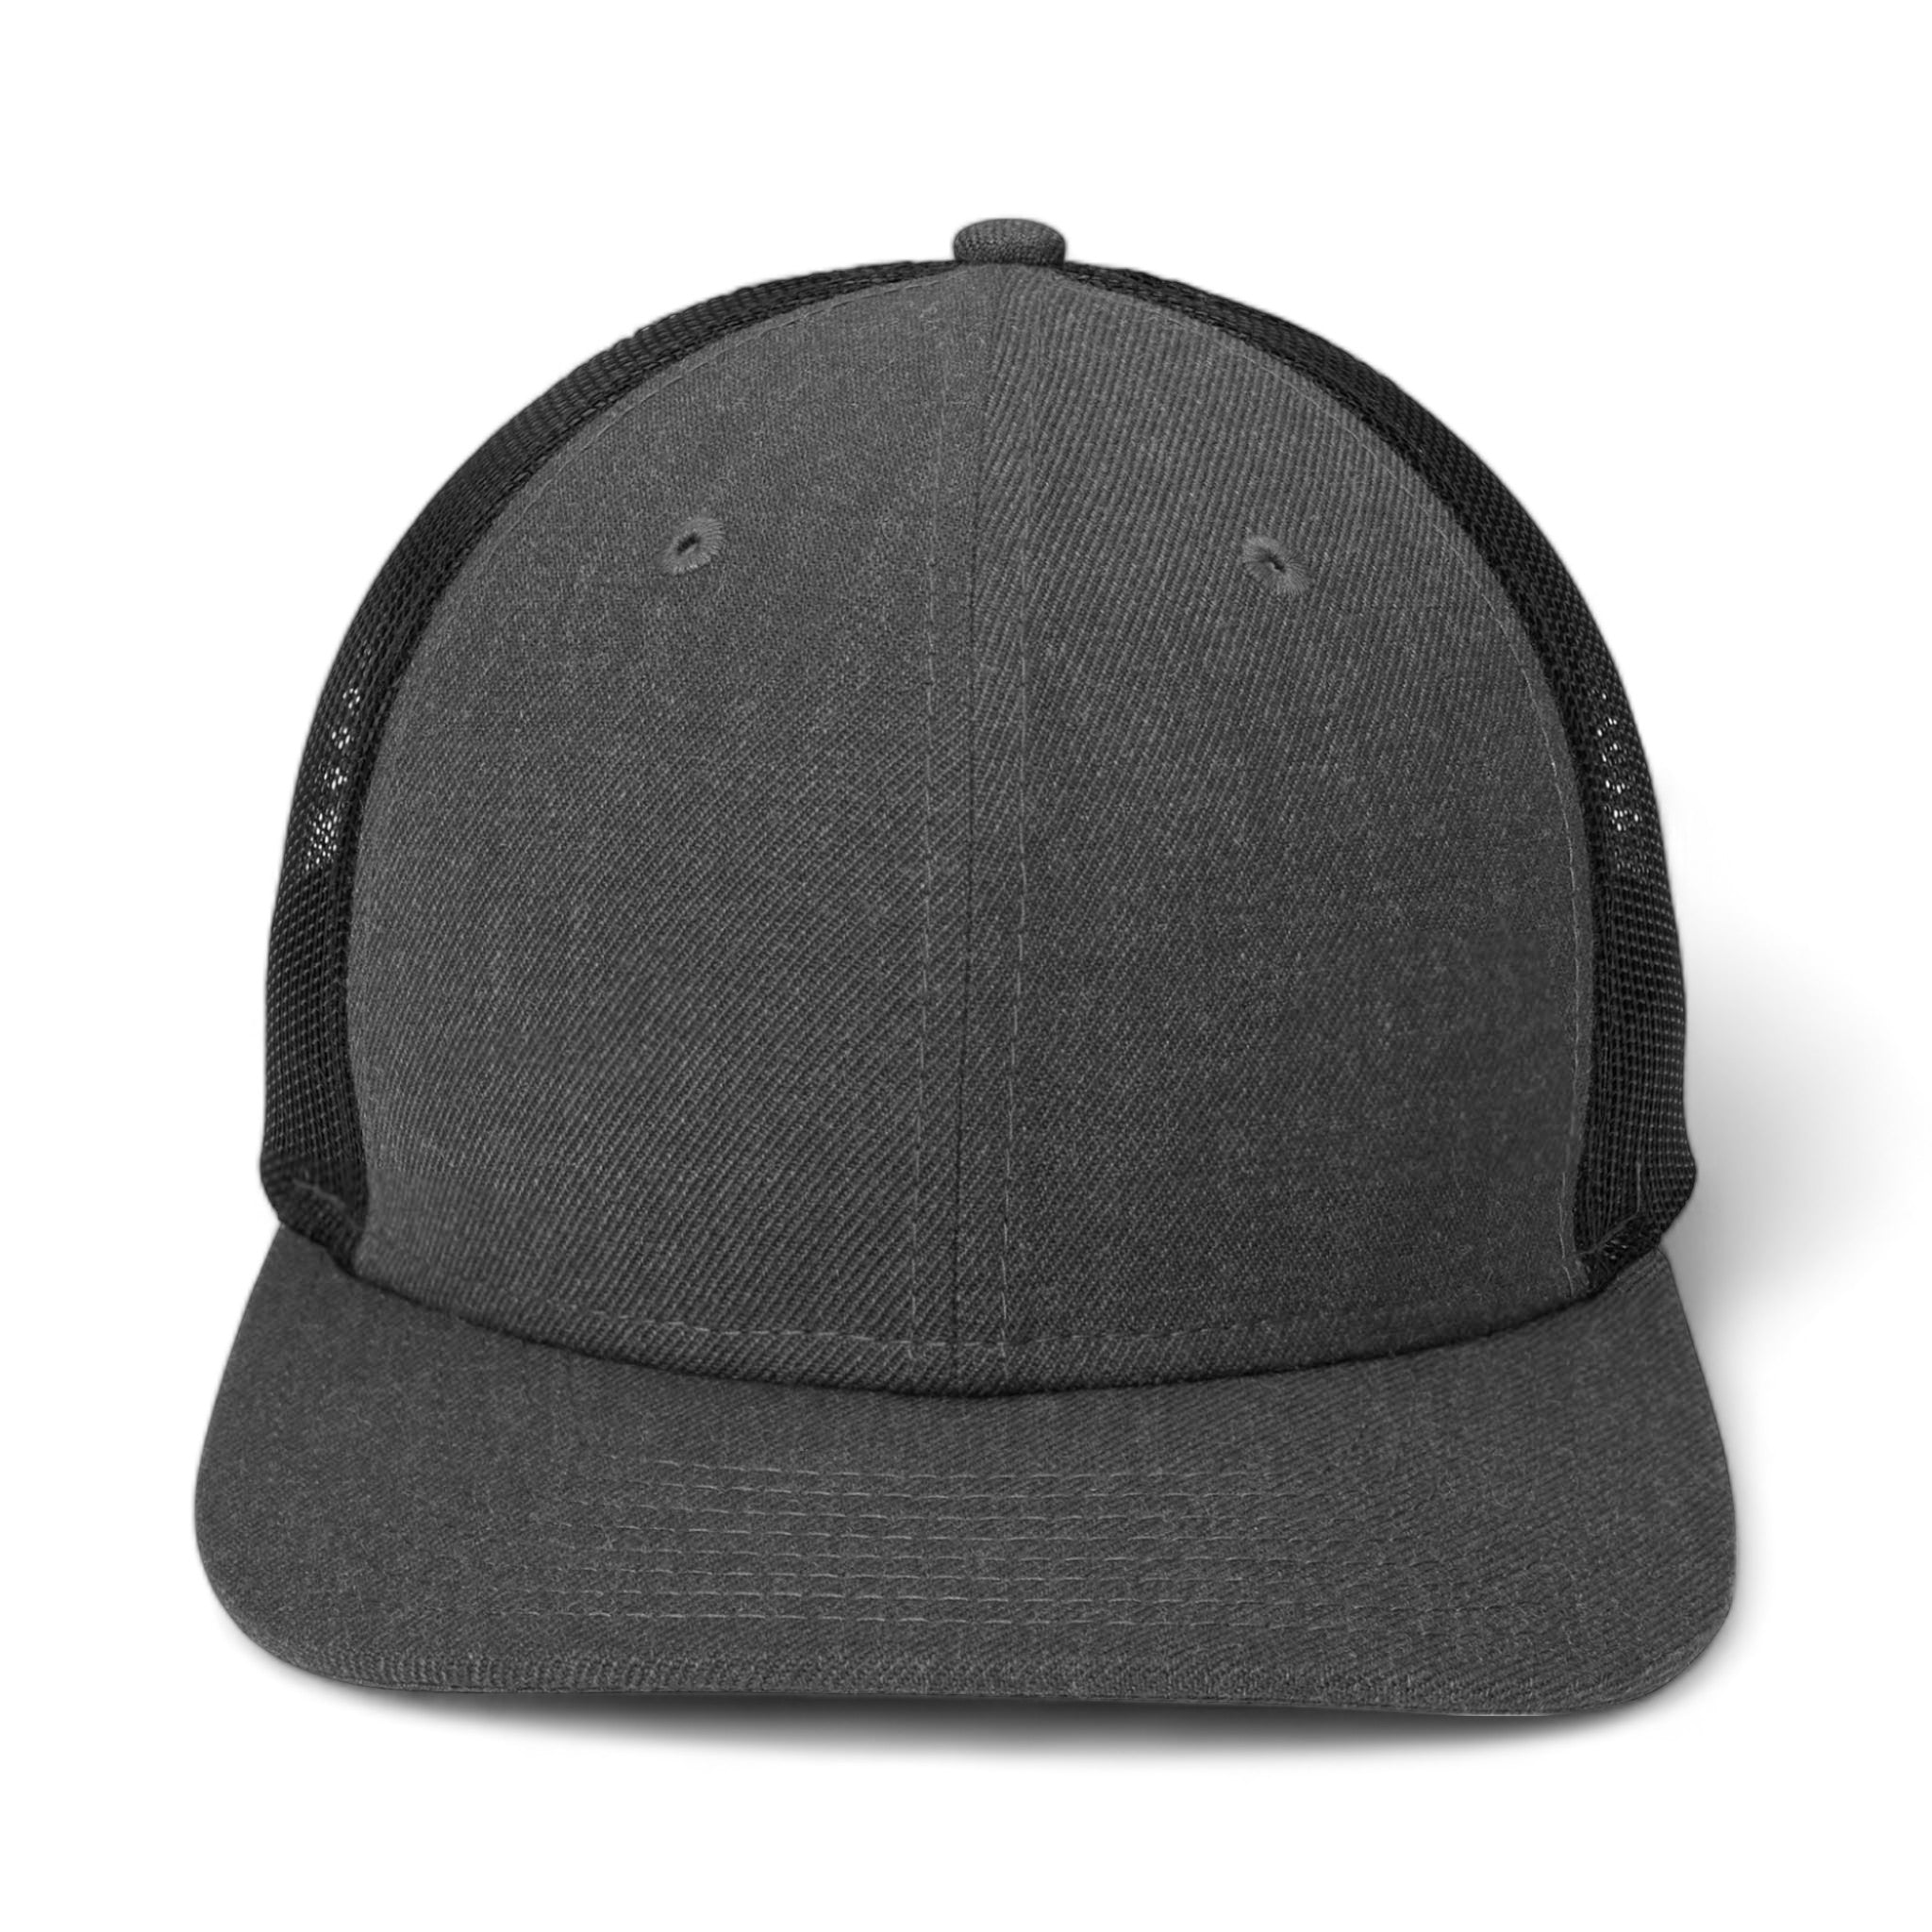 Front view of New Era NE207 custom hat in heather graphite and black